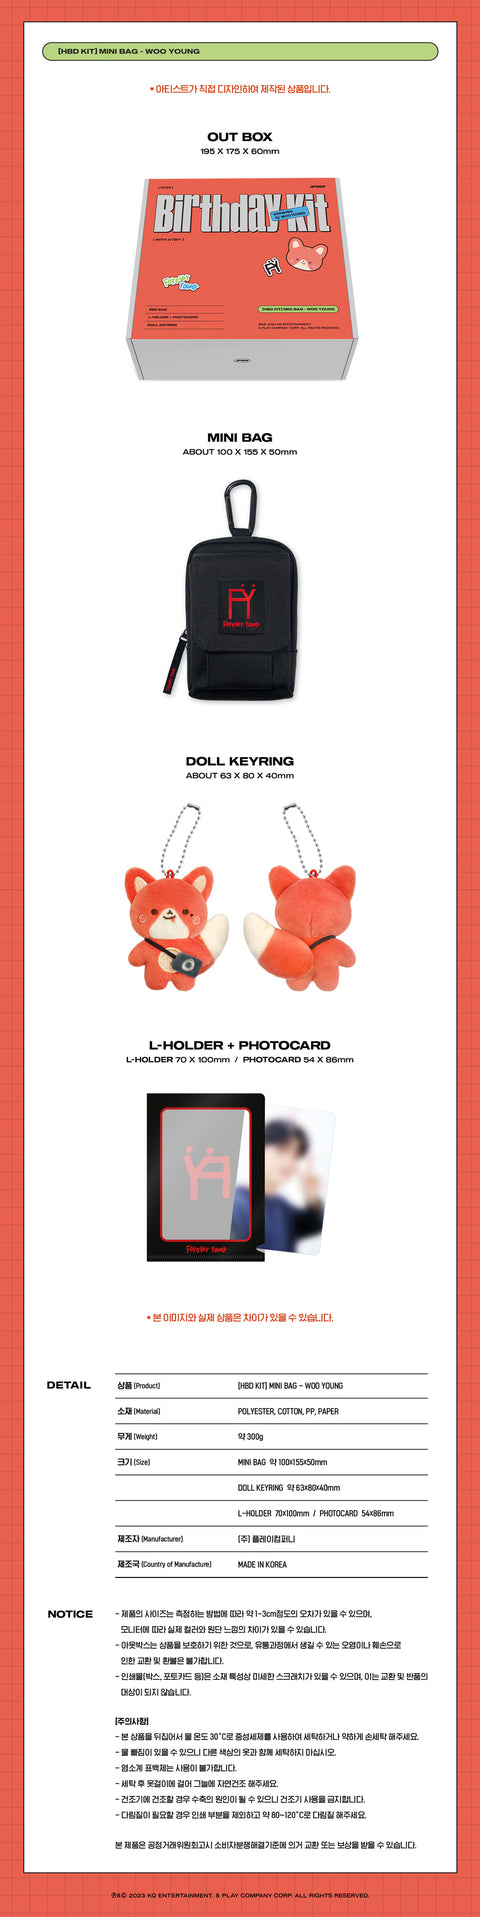 [PRE-ORDER] ATEEZ - [HBD KIT] MINI BAG - WOOYOUNG